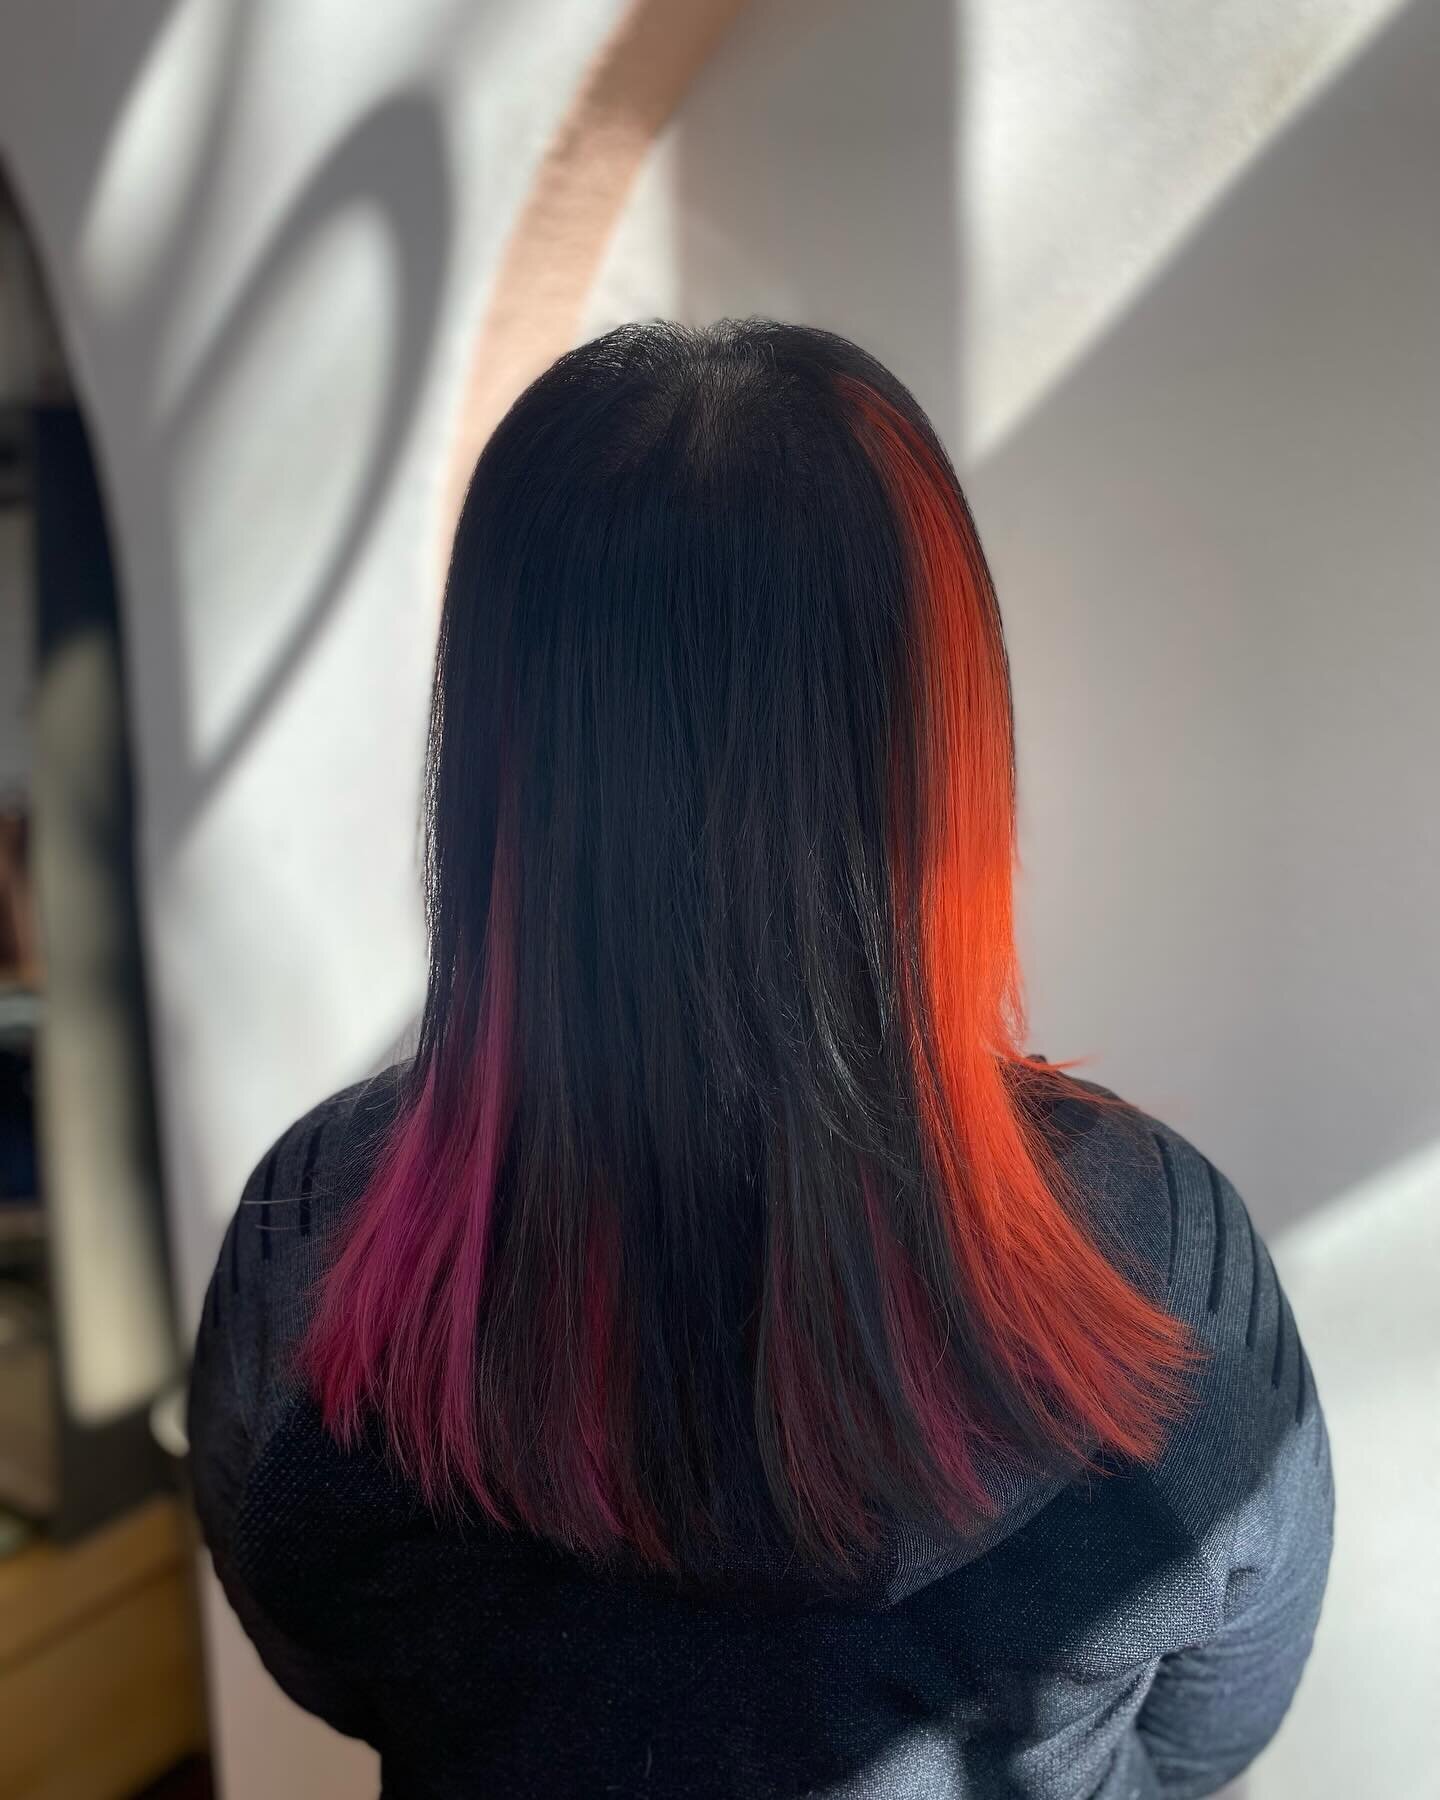 Did someone say 🧡🩷??! &bull;sWipE foR BefORe&bull;

super spring-y color correction done for Bee by Natalie💕🫰
@hairbytro 

#colorcorrection 
#splithair 
#pinkhair 
#orangehair 
#springhaircolor 
#hairtransformation 
#beforeandafterhair 
#portland